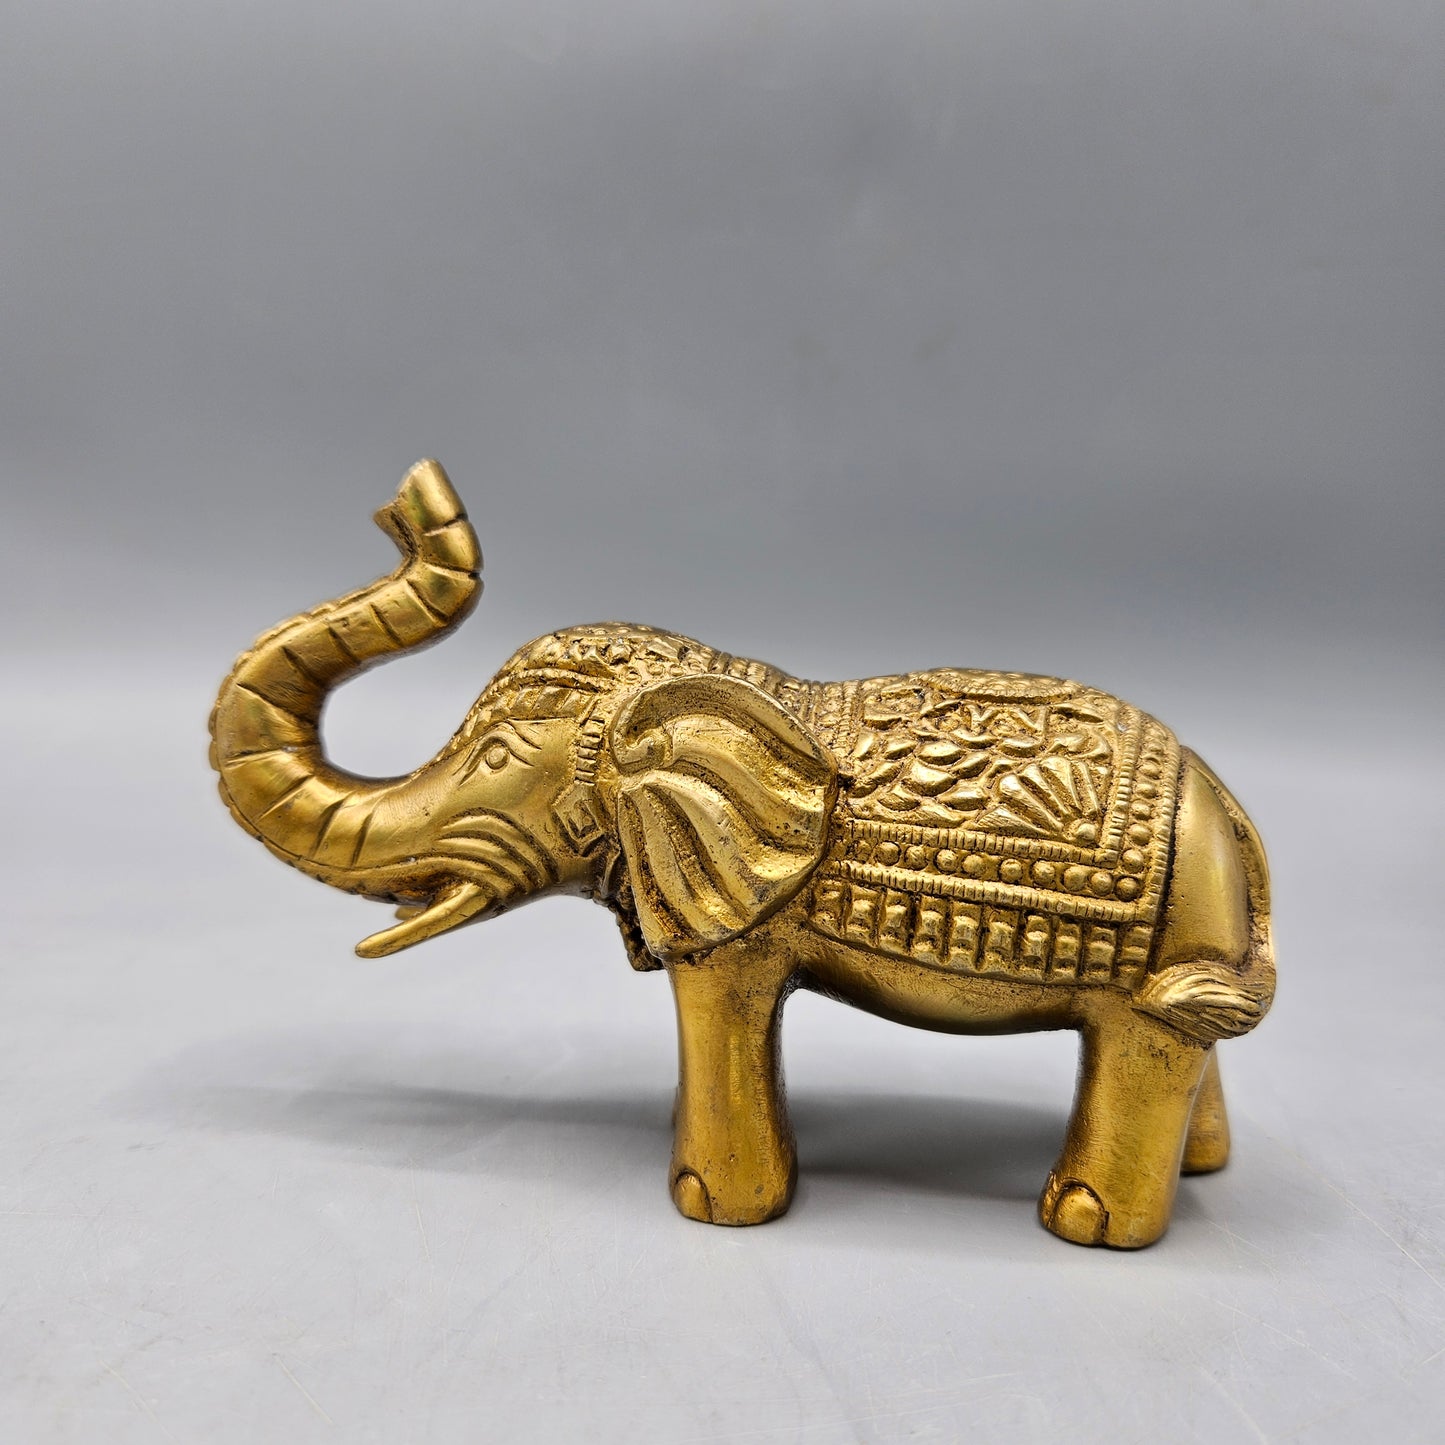 Brass Elephant Figure with Trunk Up